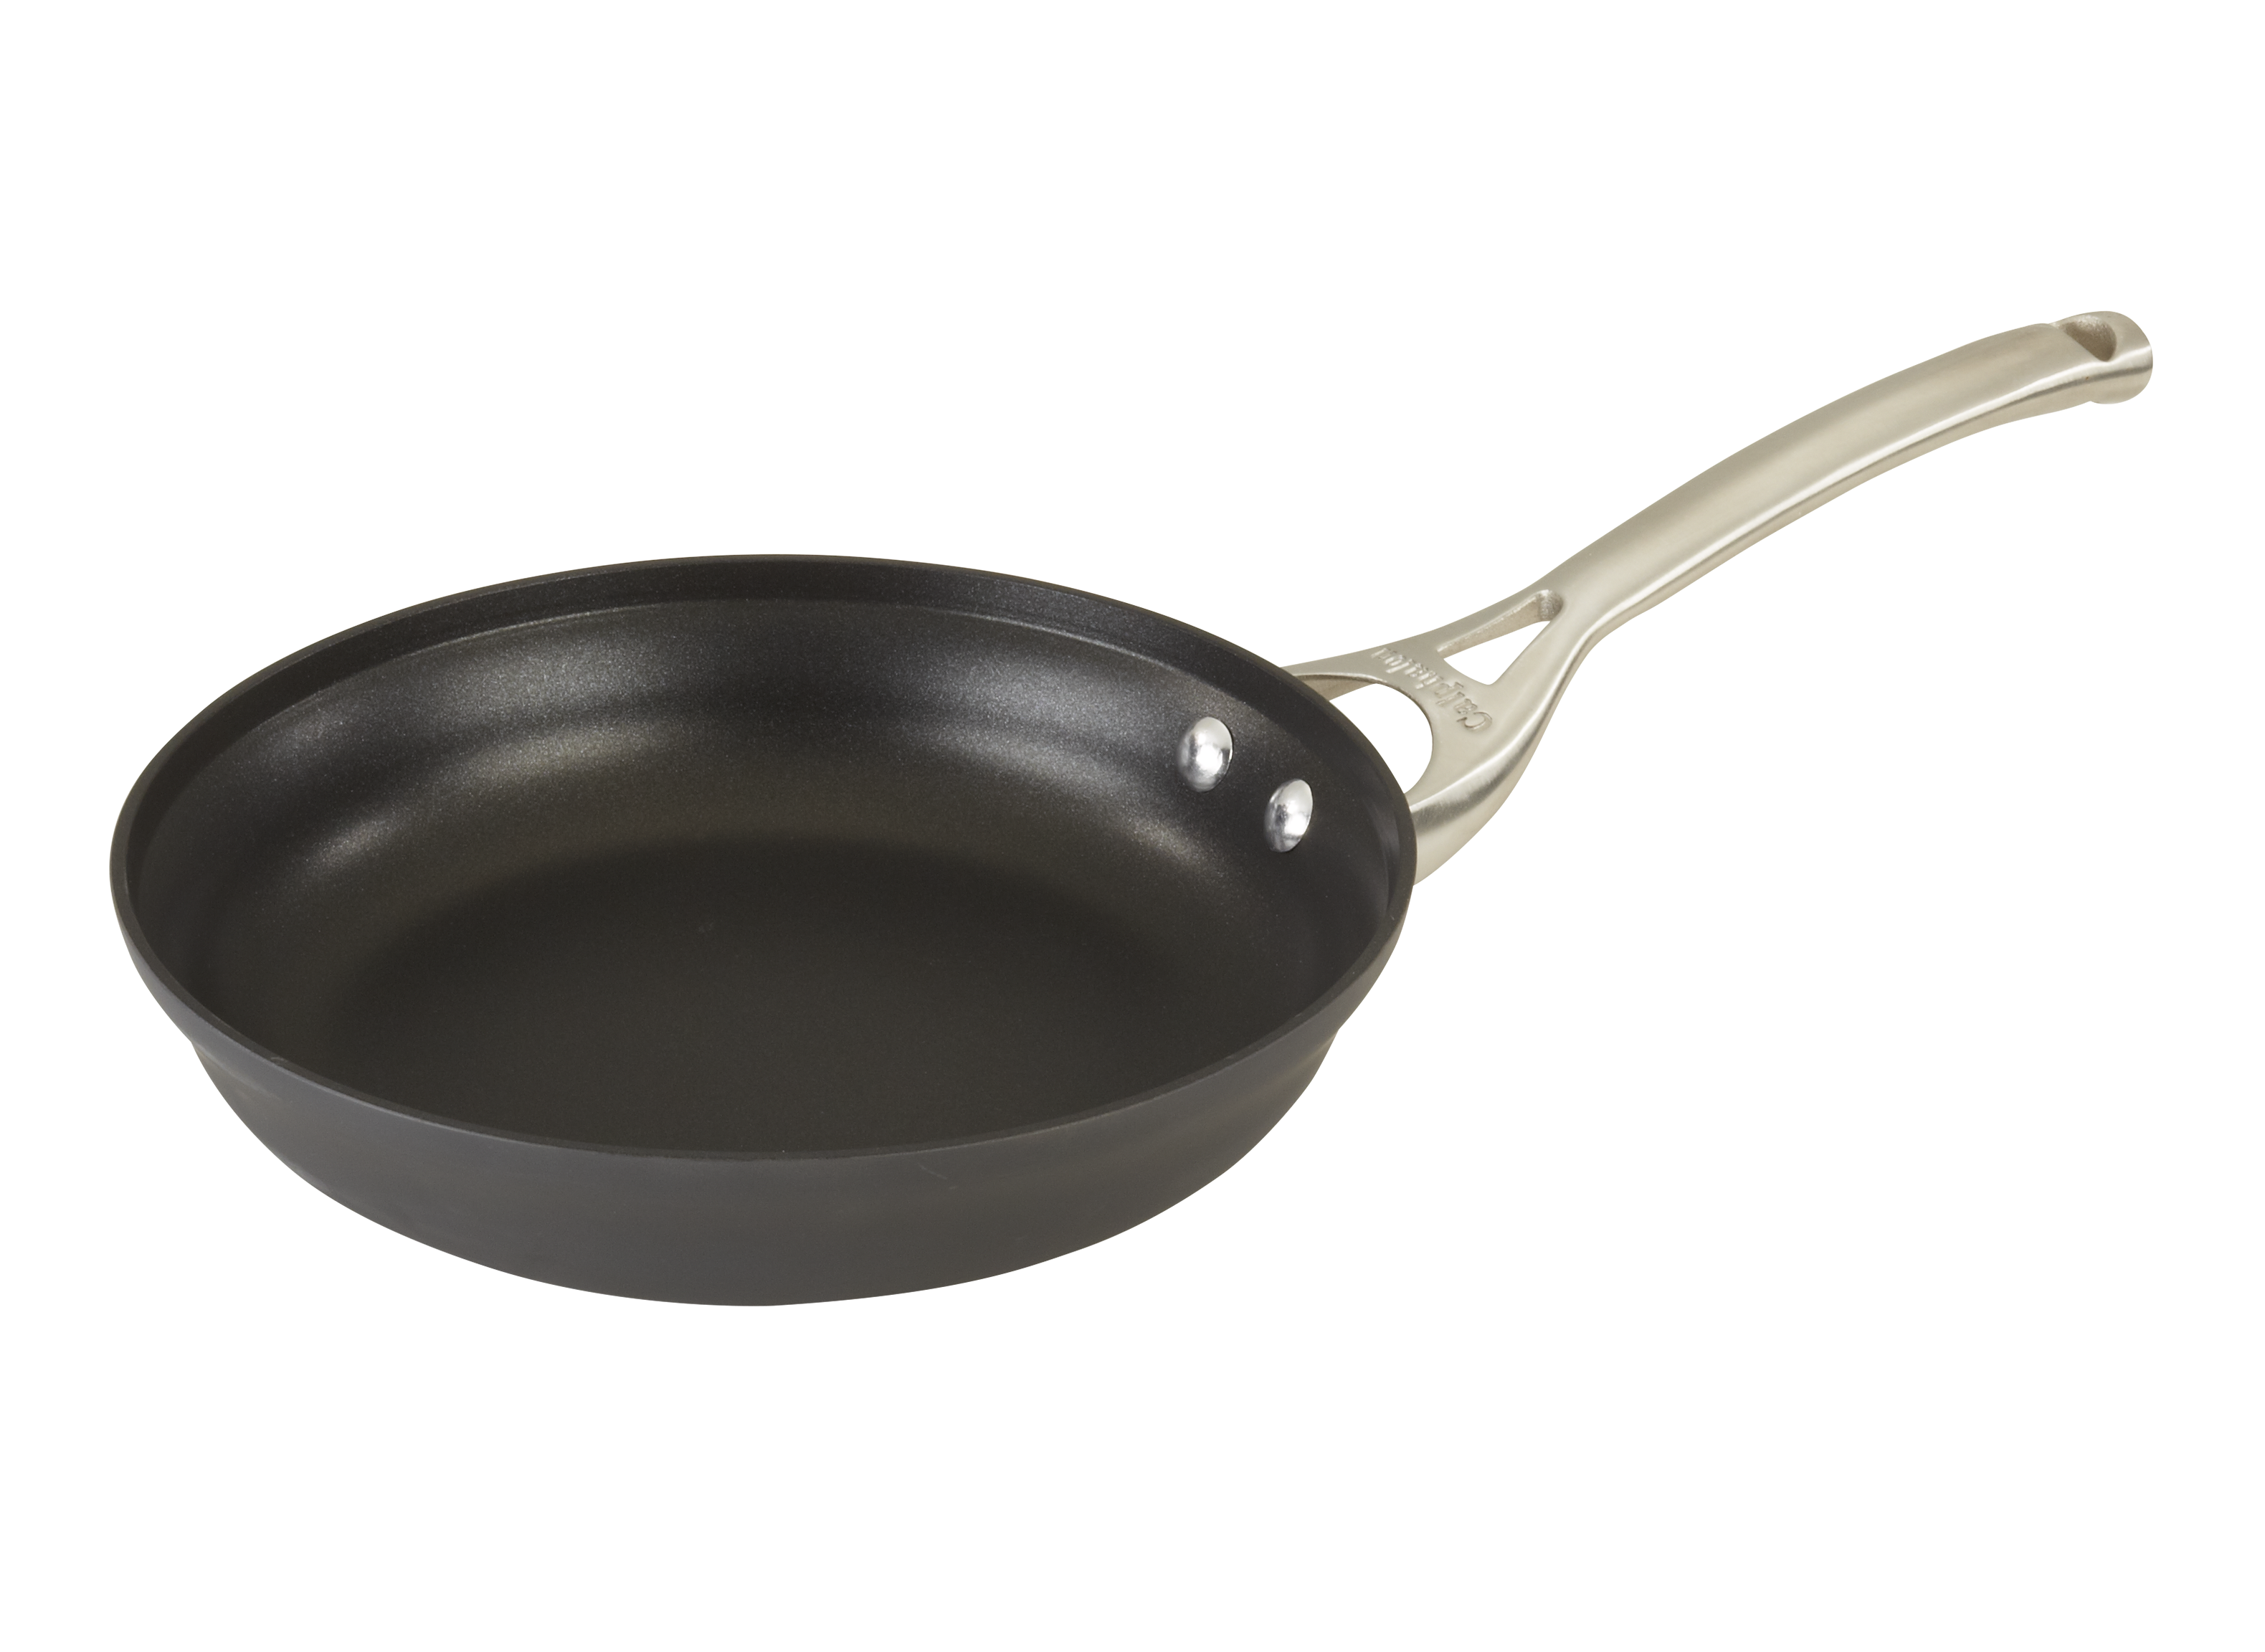 https://crdms.images.consumerreports.org/prod/products/cr/models/393392-fryingpans-calphalon-contemporarynonstick.png